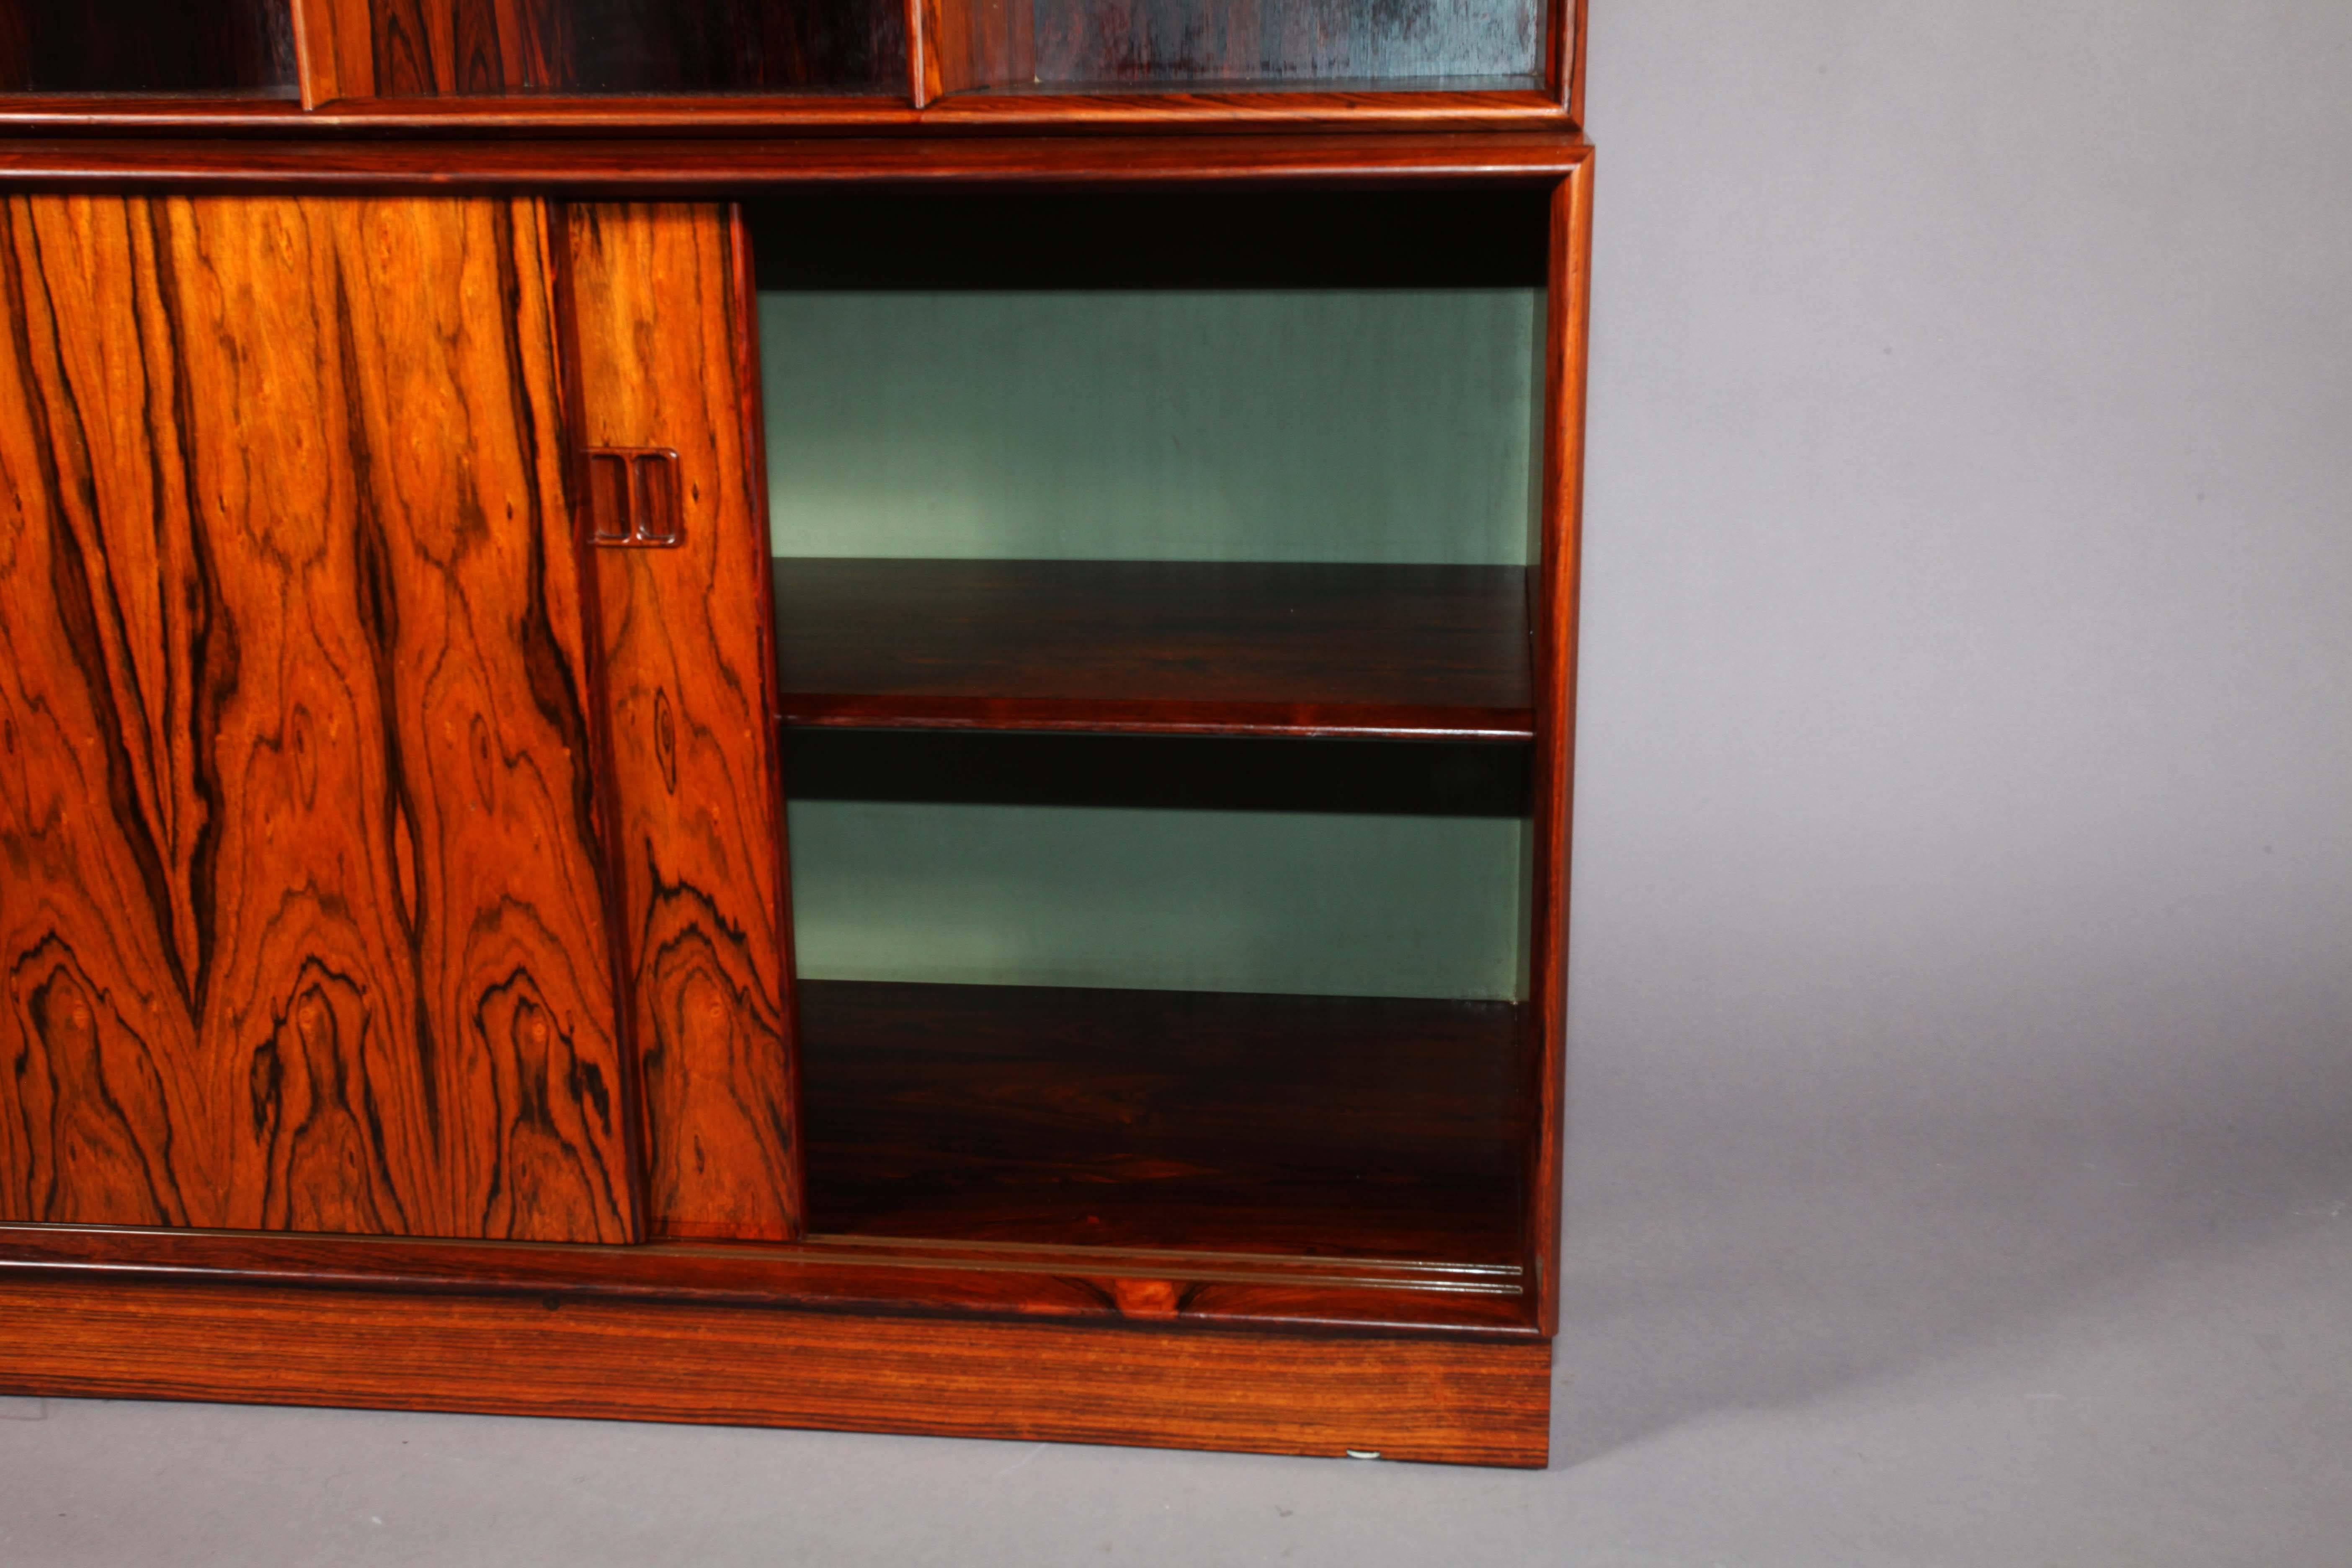 Midcentury rosewood wall unit,
Manufacture Dyrlund,
Denmark, 1960.
Base with two sliding doors, top book bookshelf.
Rosewood

Combinable with item number LU 101469355673 vitrine
Combinable with item number LU 101469355363 secretary.
 